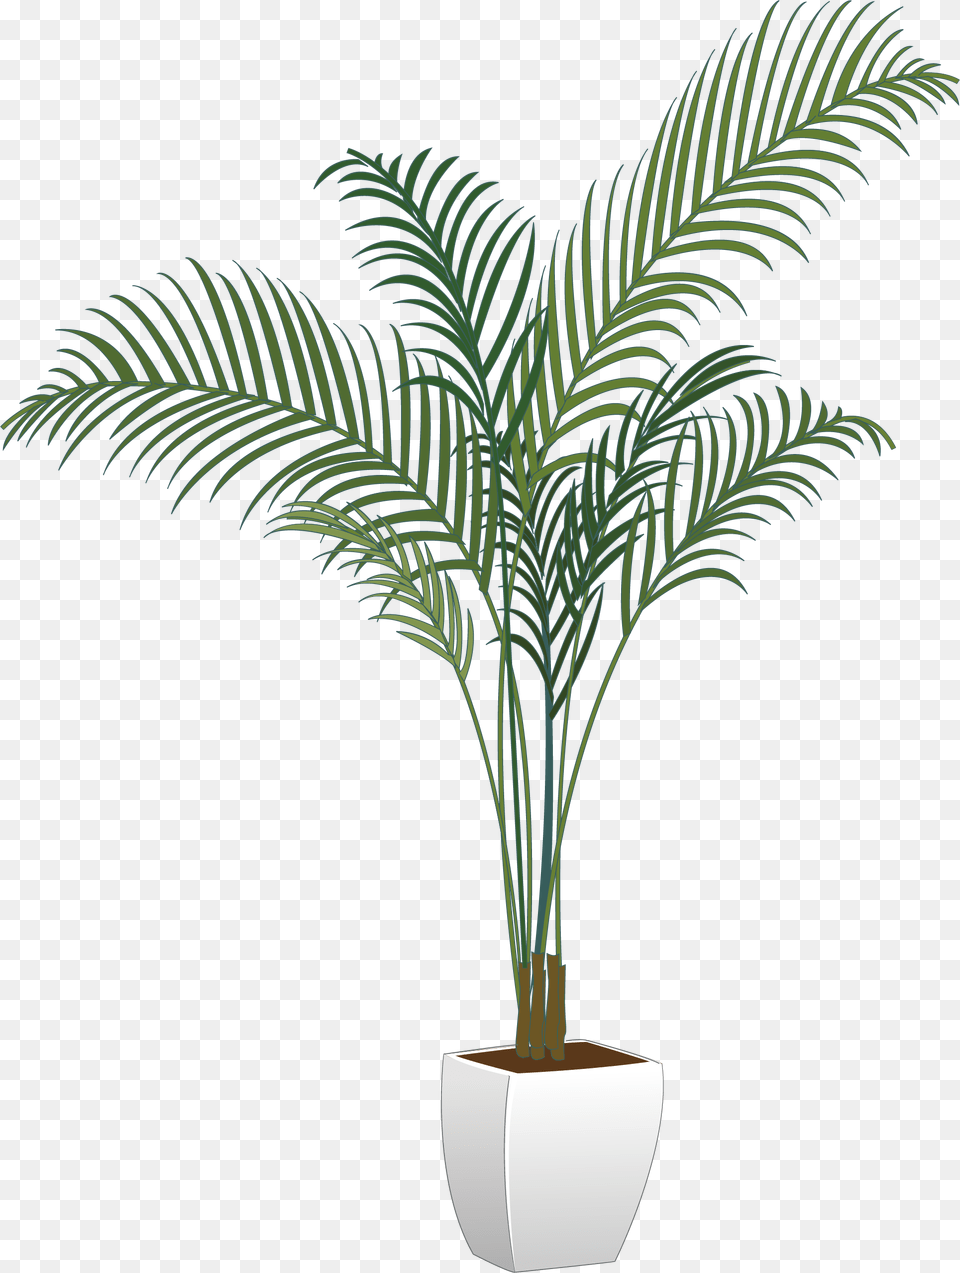 Background Pot Plant, Palm Tree, Tree, Leaf, Potted Plant Png Image